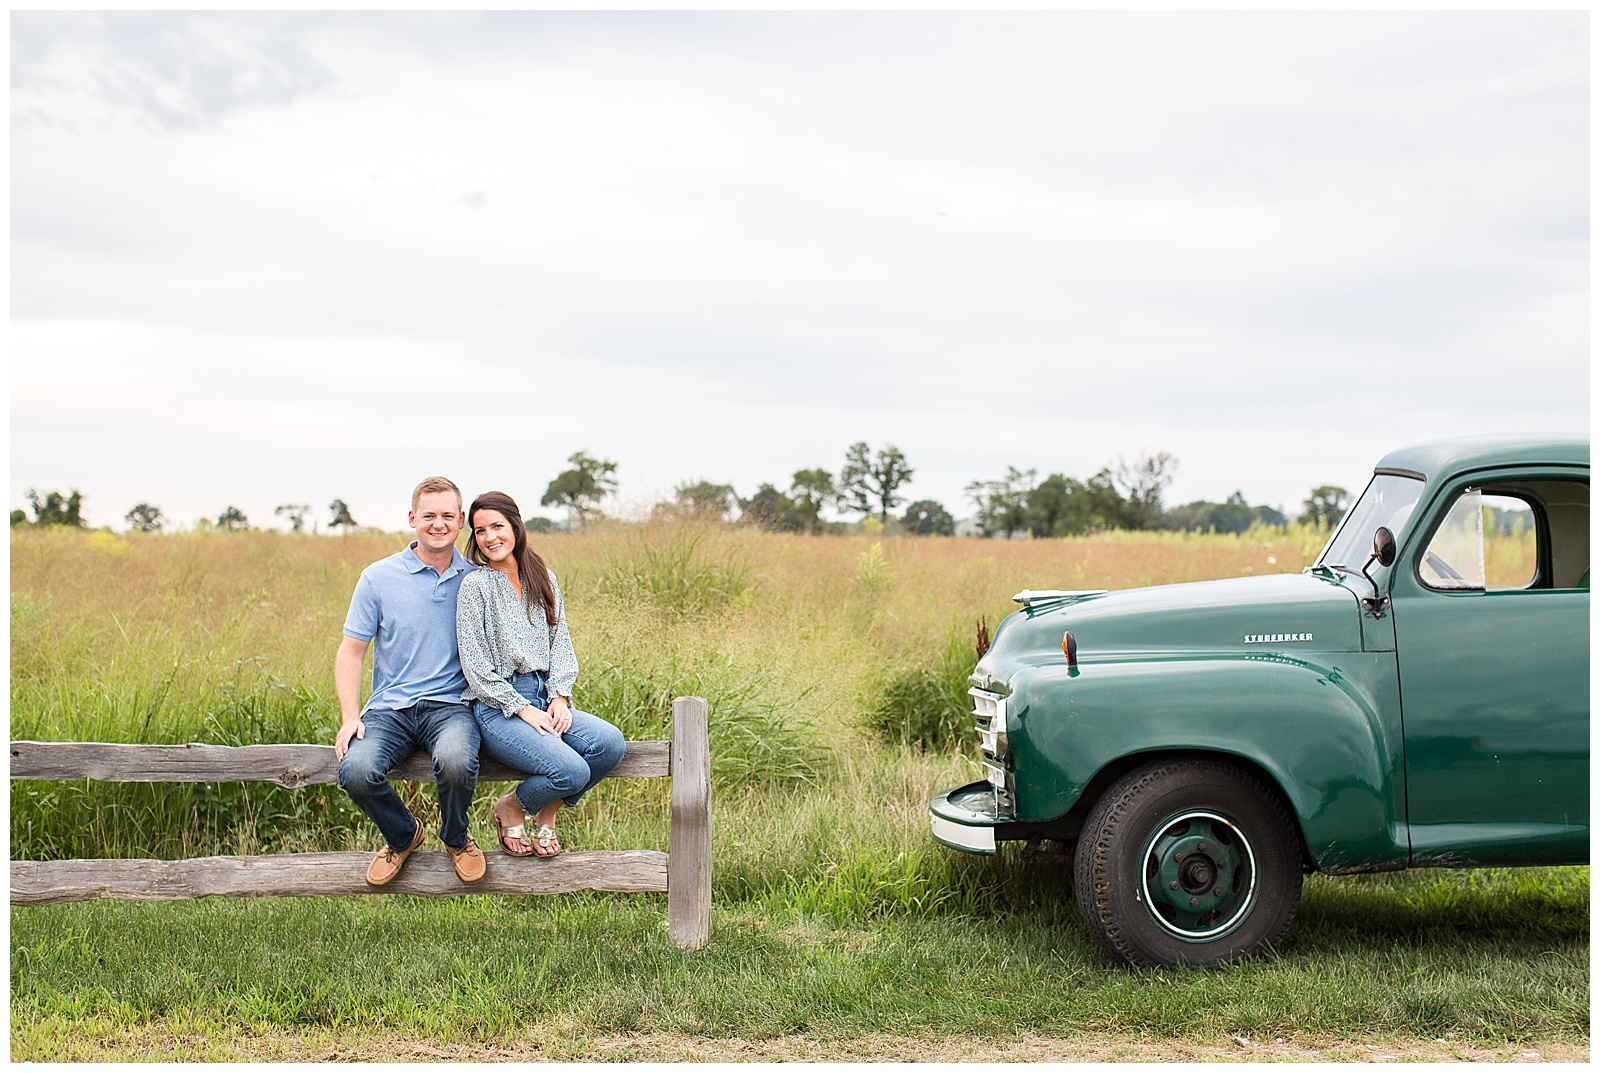 fall engagement photo session in a grassy field with a vintage truck